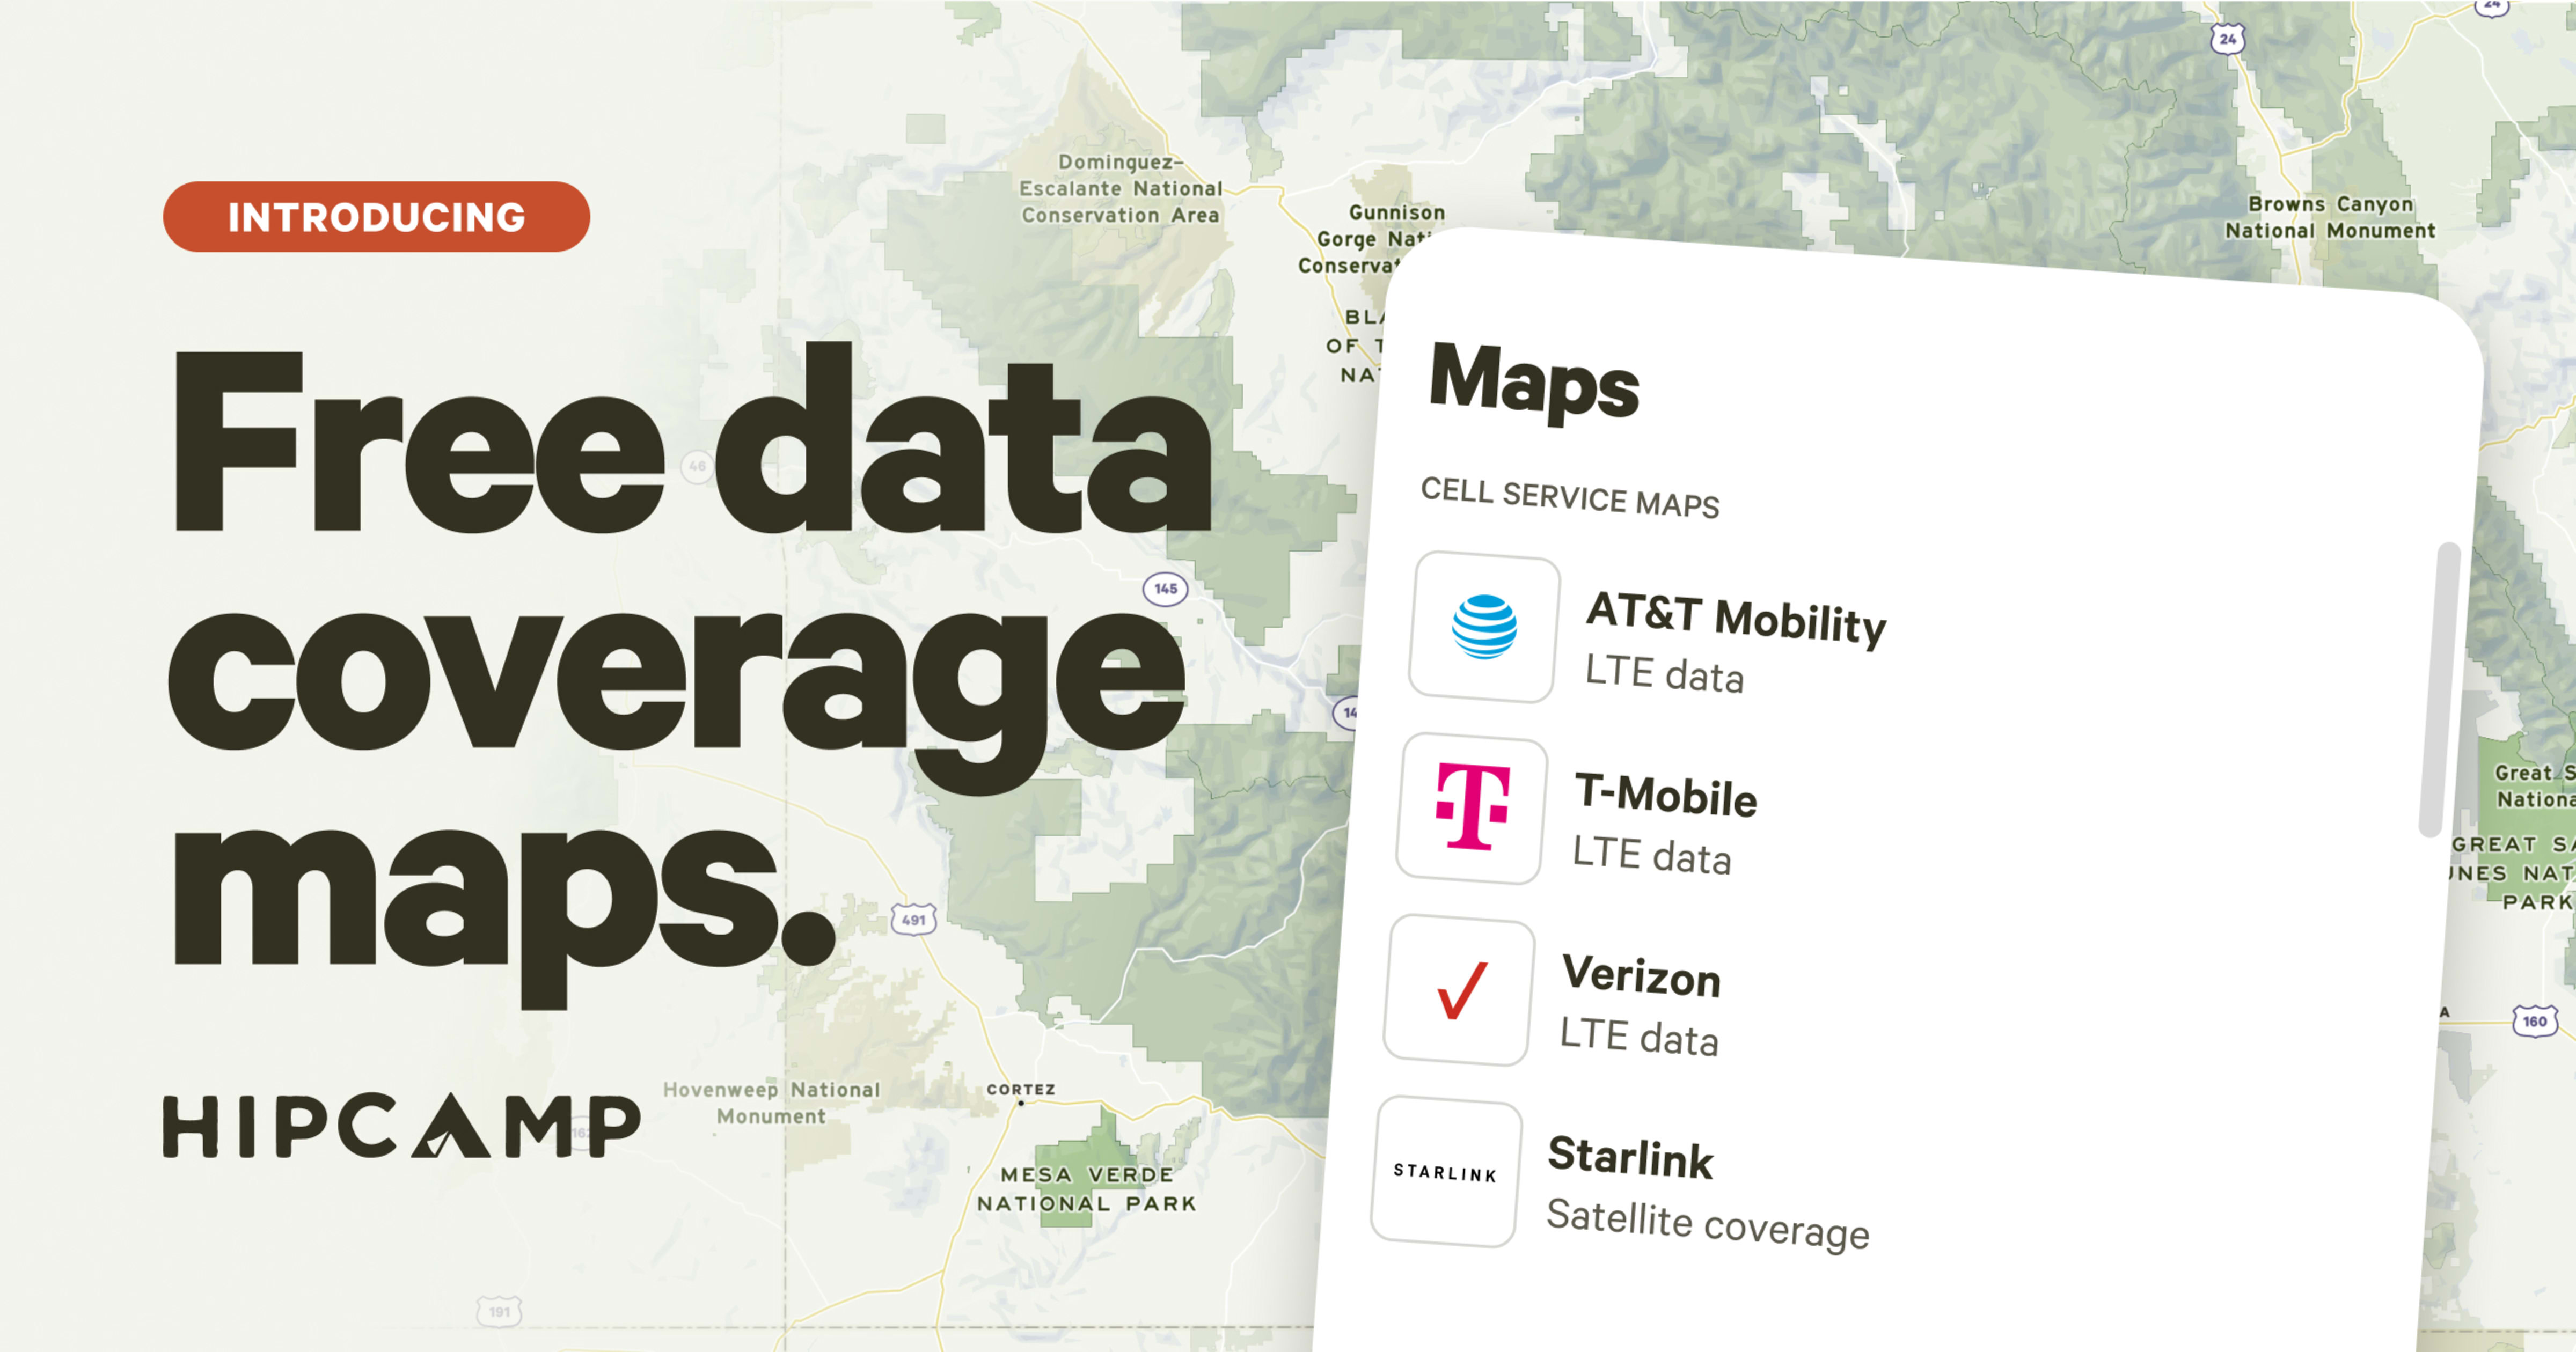 Introducing Free Data Coverage Maps to Make Working from Nature Easier